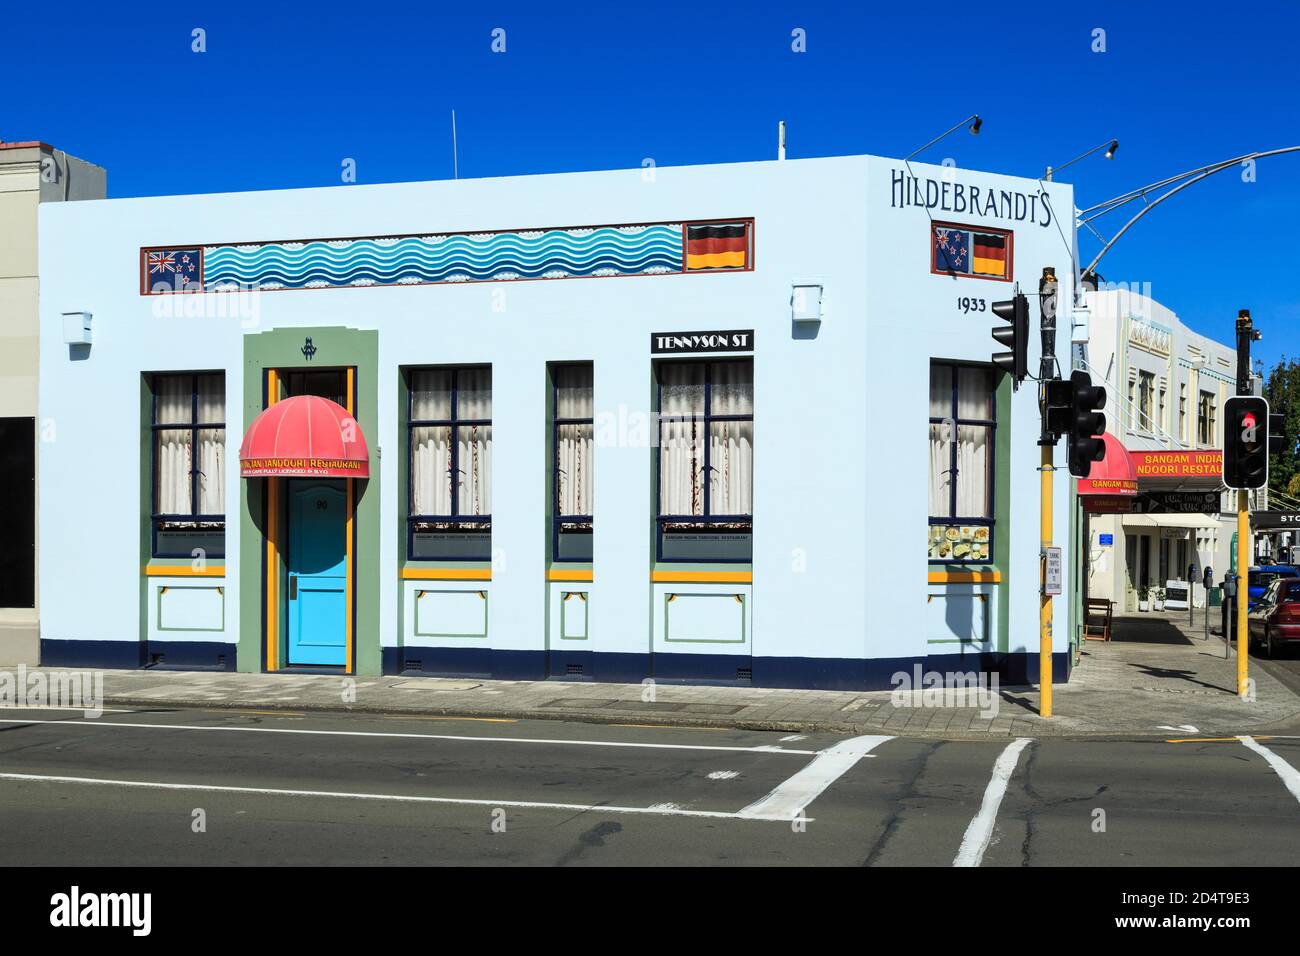 Napier, New Zealand. Hildebrandt's Building (1933), one of the many Art Deco buildings in the city Stock Photo